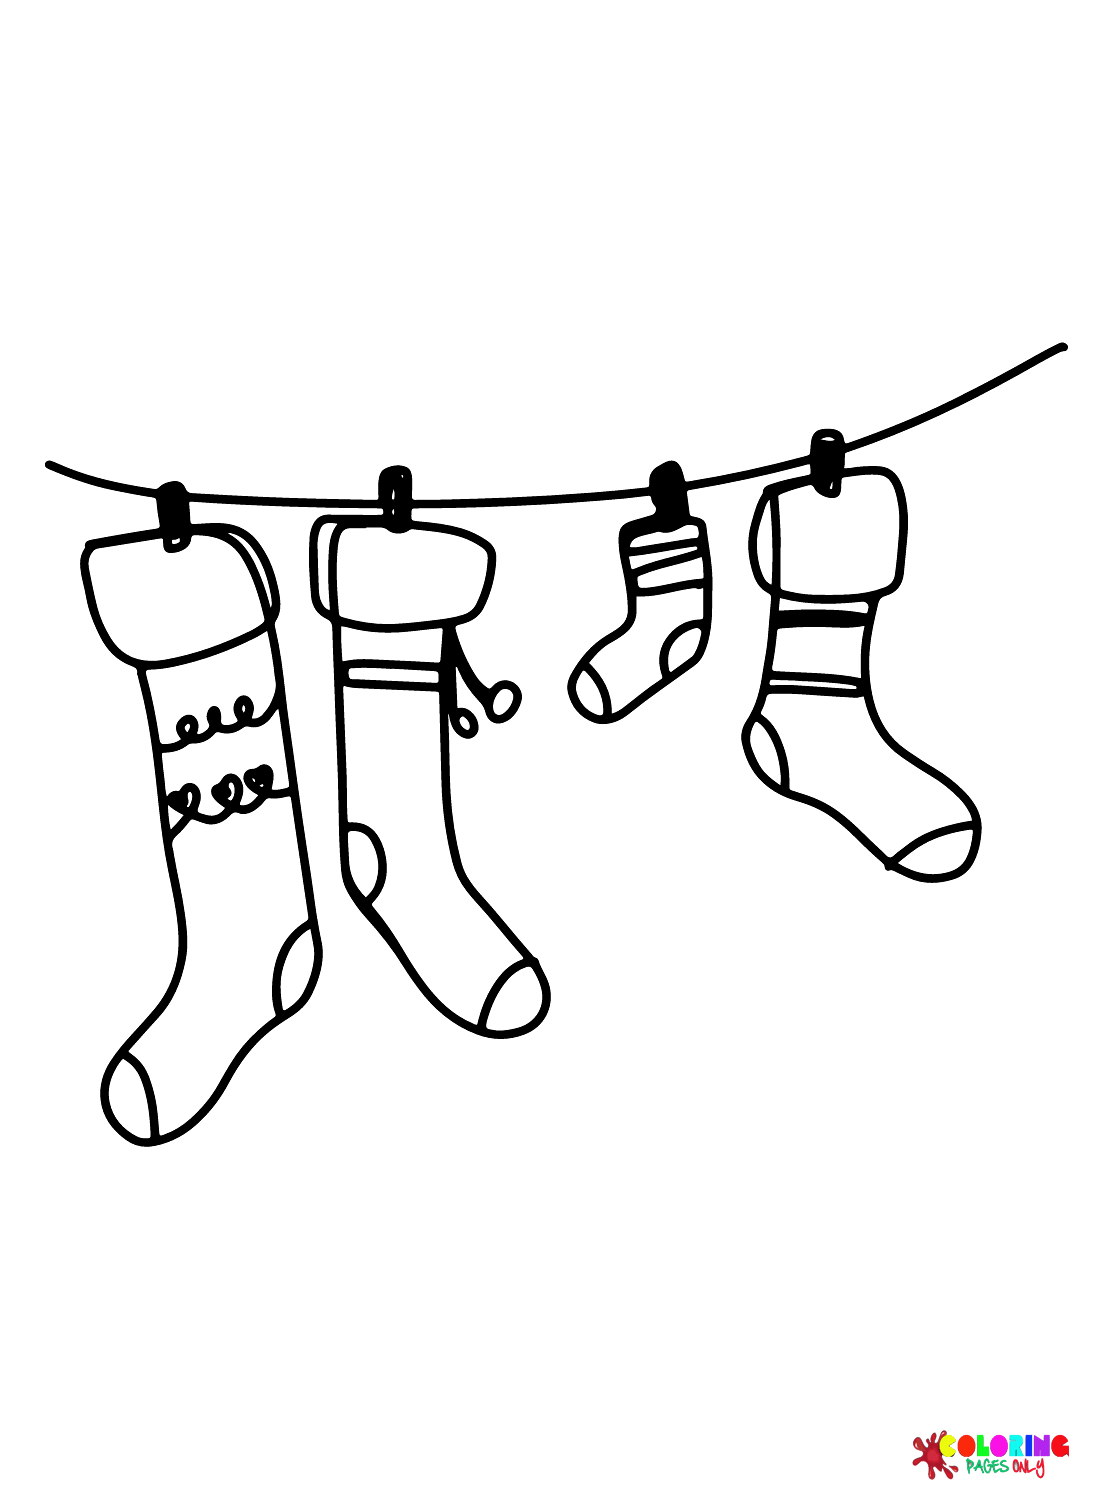 Socks Coloring Pages Free Printable Coloring Pages